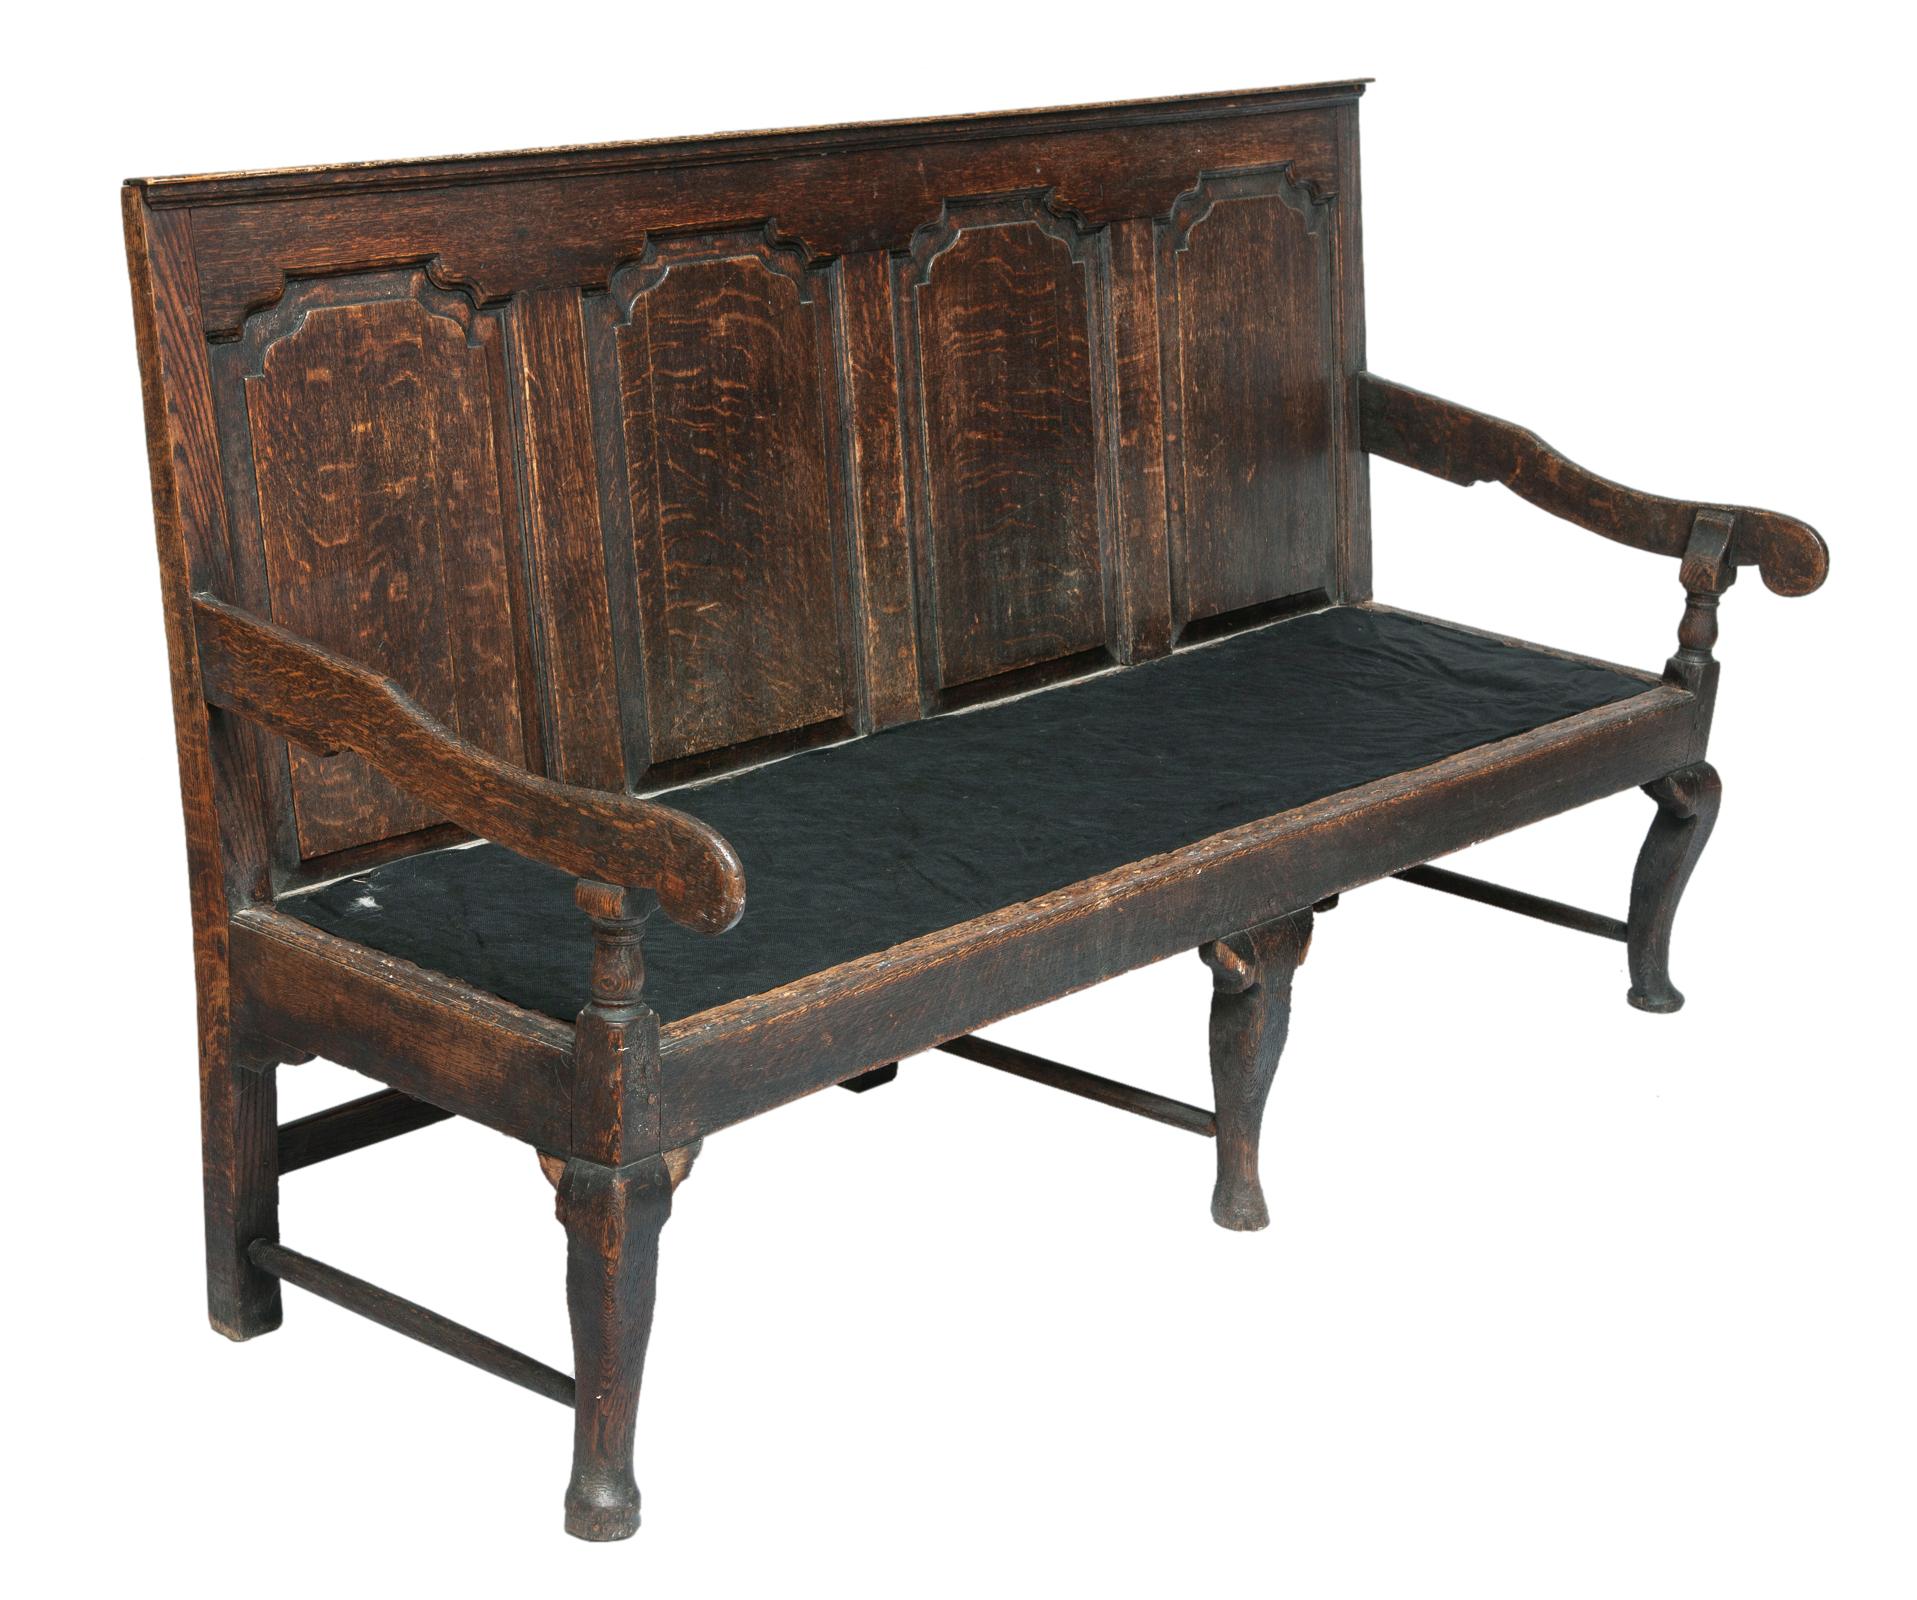 Hand-Crafted 19thC Upholstered Mission Oak Church Pew